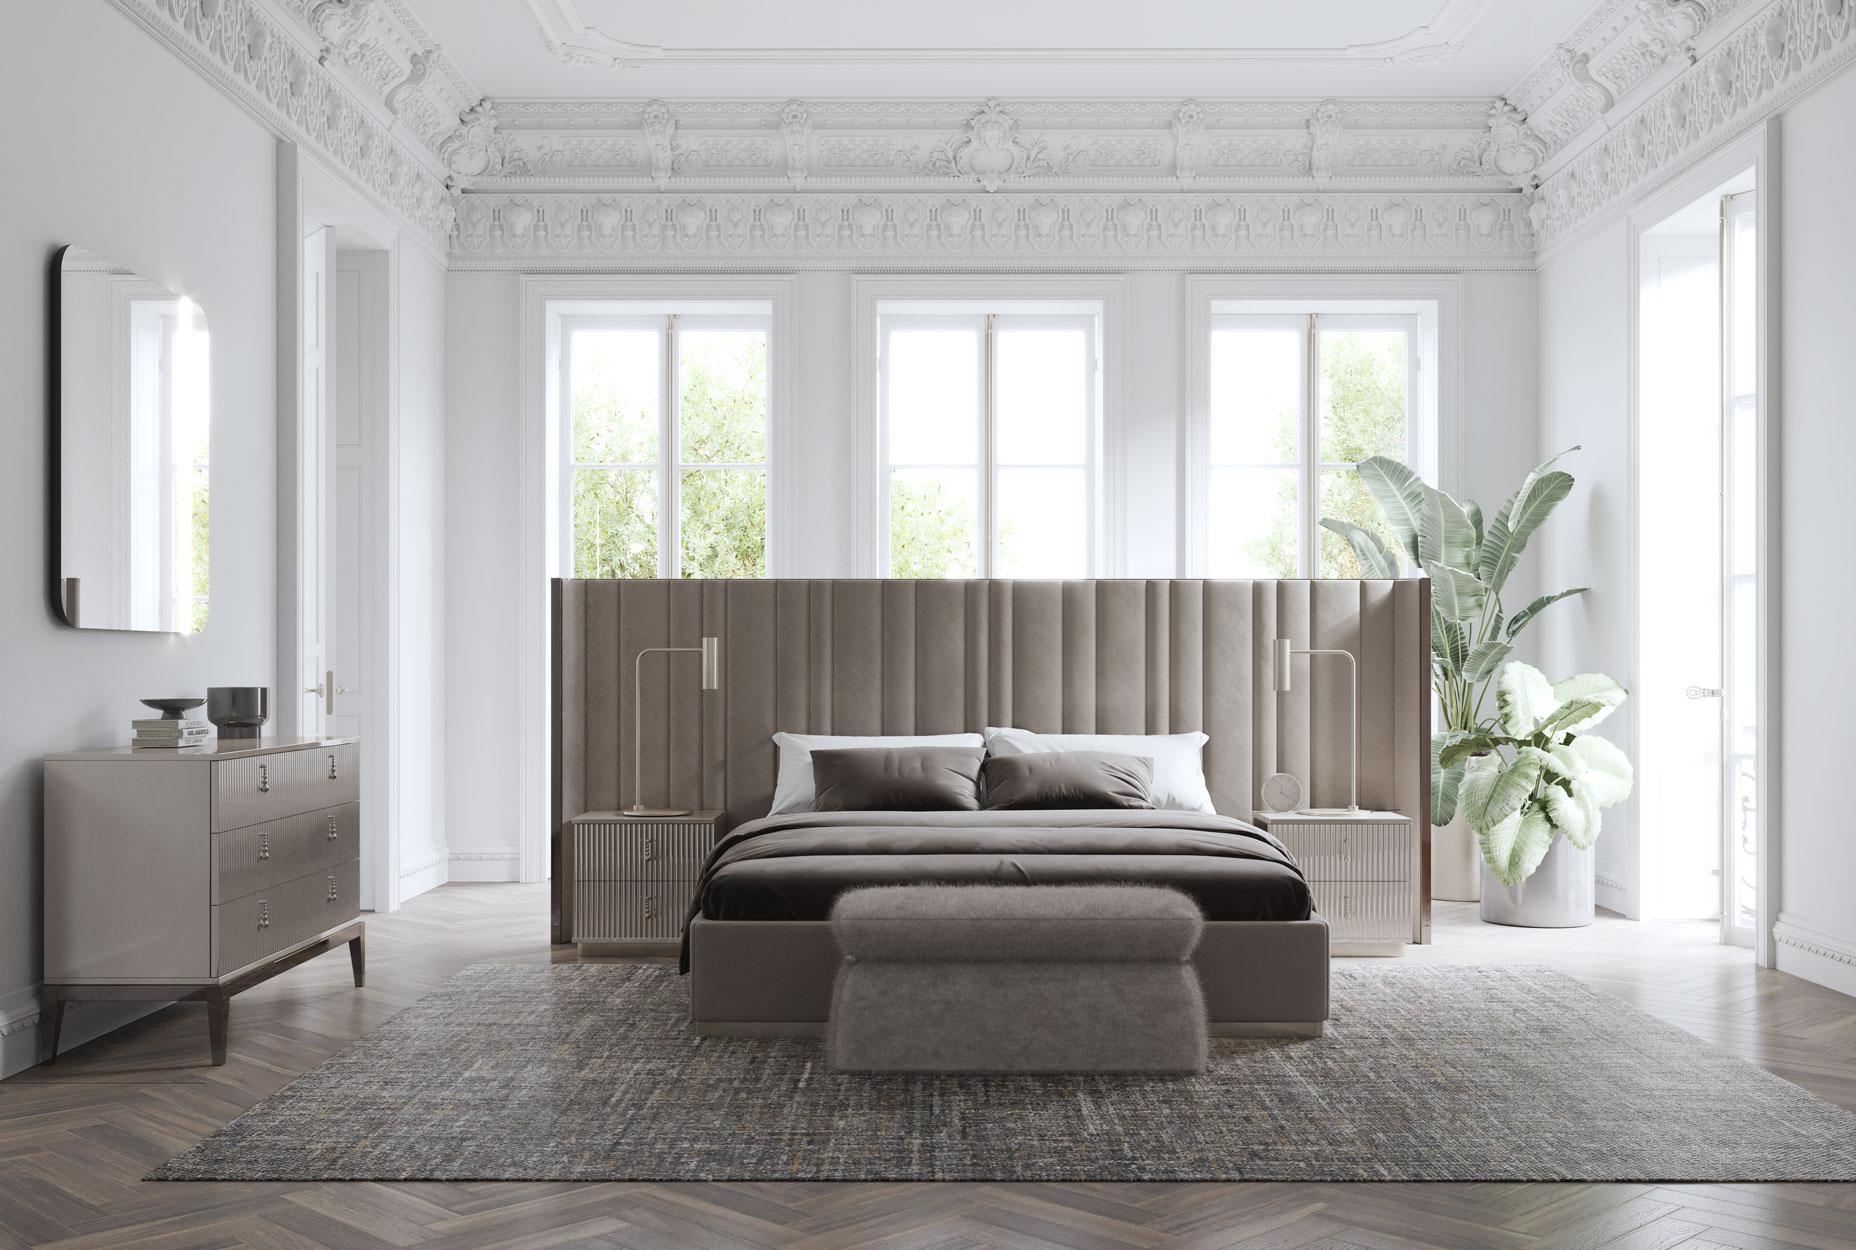 Saga is an upholstered bed born from the encounter between design and craftsmanship. Headboard in curved poplar plywood with margins in oak wood. The headboard and bed frame are upholstered in elegant velvet fabric. Base margins finished in ebony